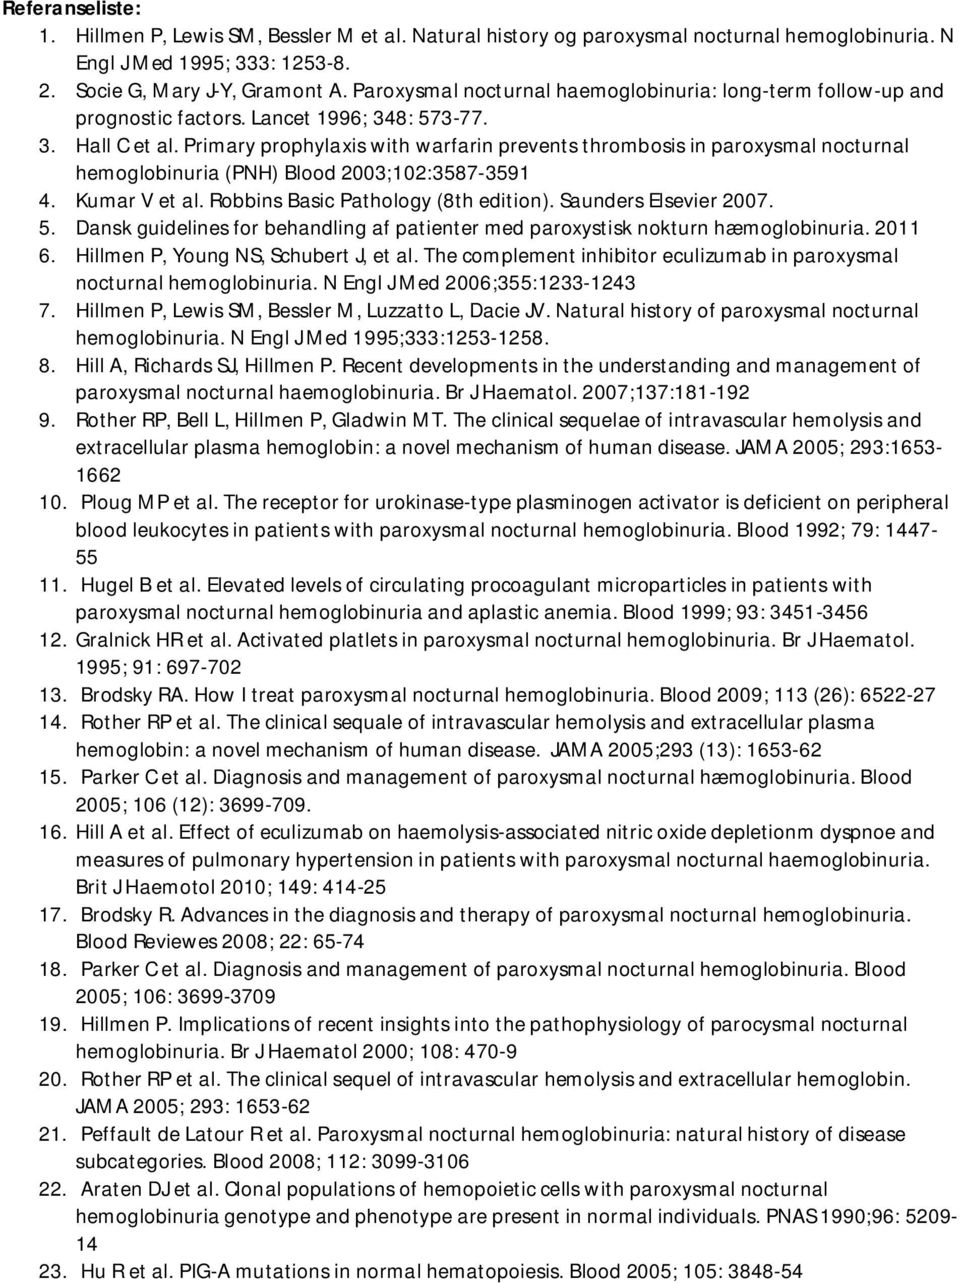 Primary prophylaxis with warfarin prevents thrombosis in paroxysmal nocturnal hemoglobinuria (PNH) Blood 2003;102:3587-3591 4. Kumar V et al. Robbins Basic Pathology (8th edition).